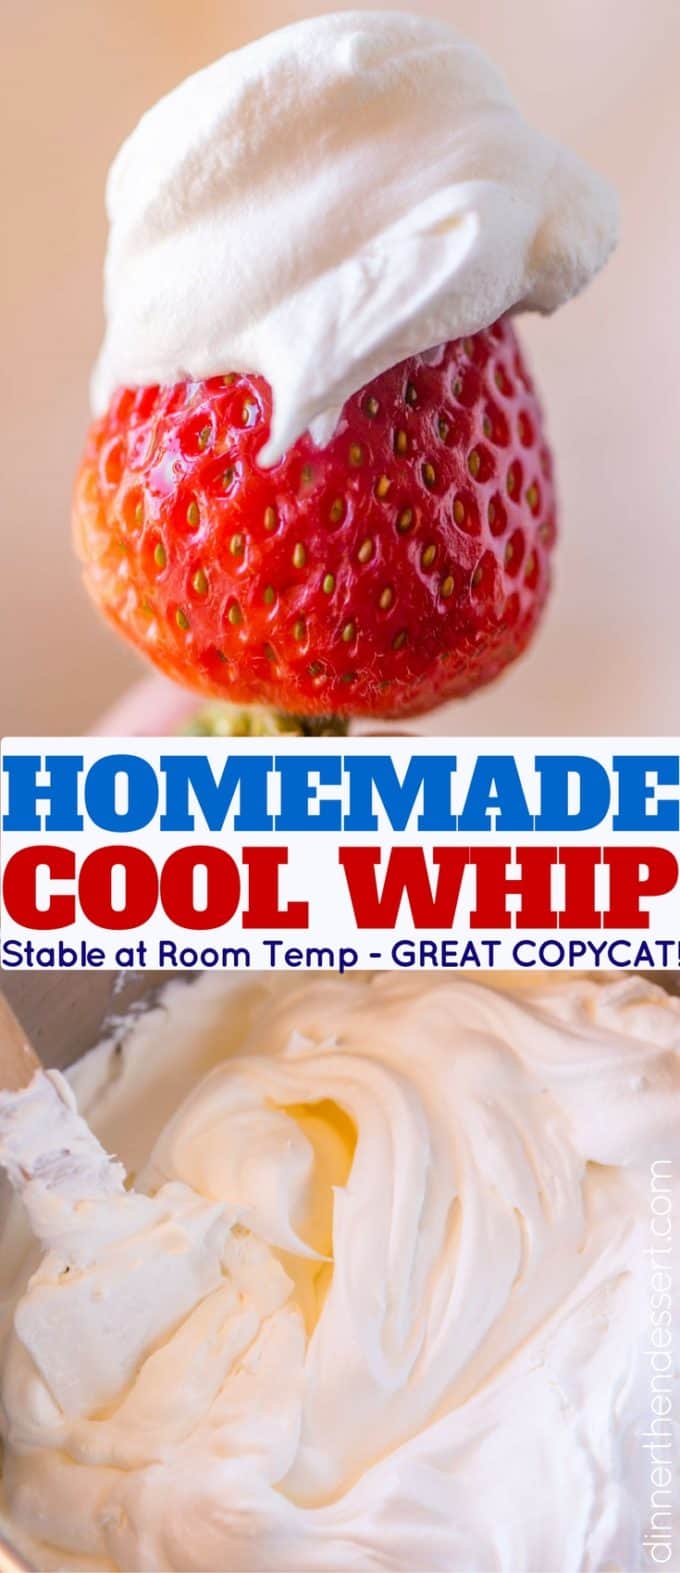 Homemade Cool Whip that is stable and can be frozen and defrosted like the store bought kind but made at home and SO delicious. Perfect for any recipes you're making that ask for Cool Whip!